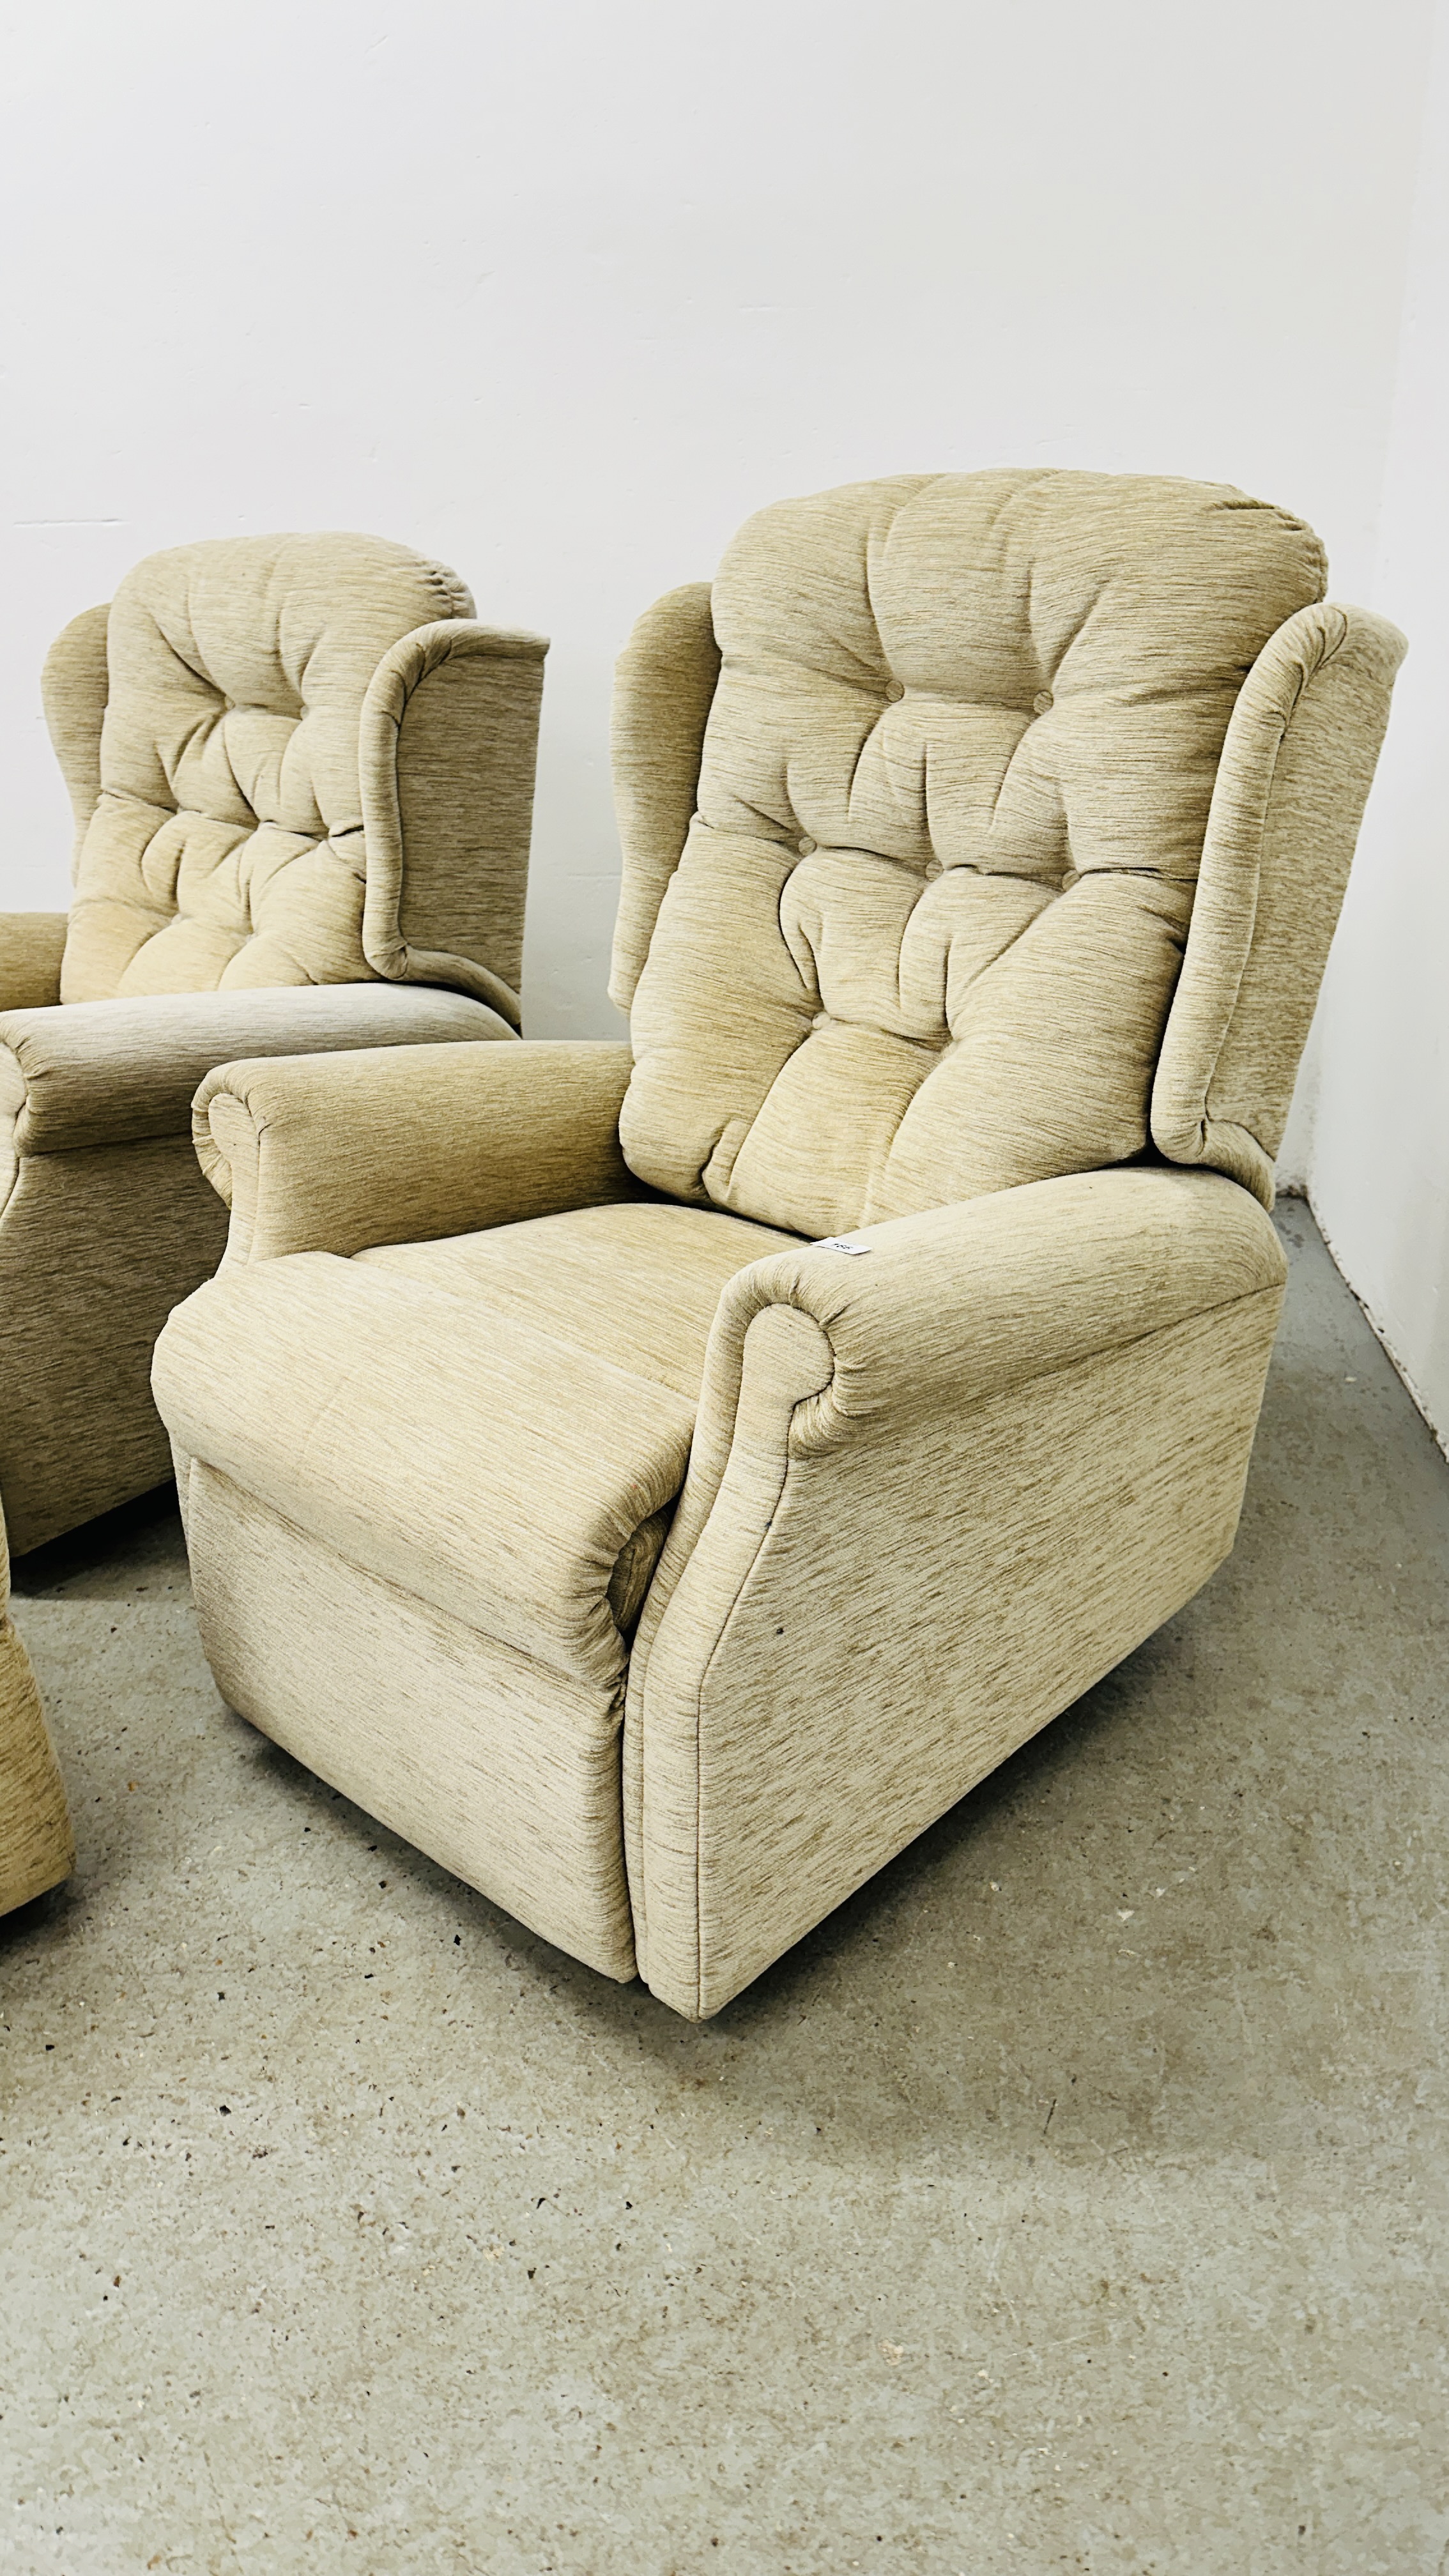 A PAIR OF GOOD QUALITY FAWN UPHOLSTERED RECLINING EASY CHAIRS. - Image 10 of 11